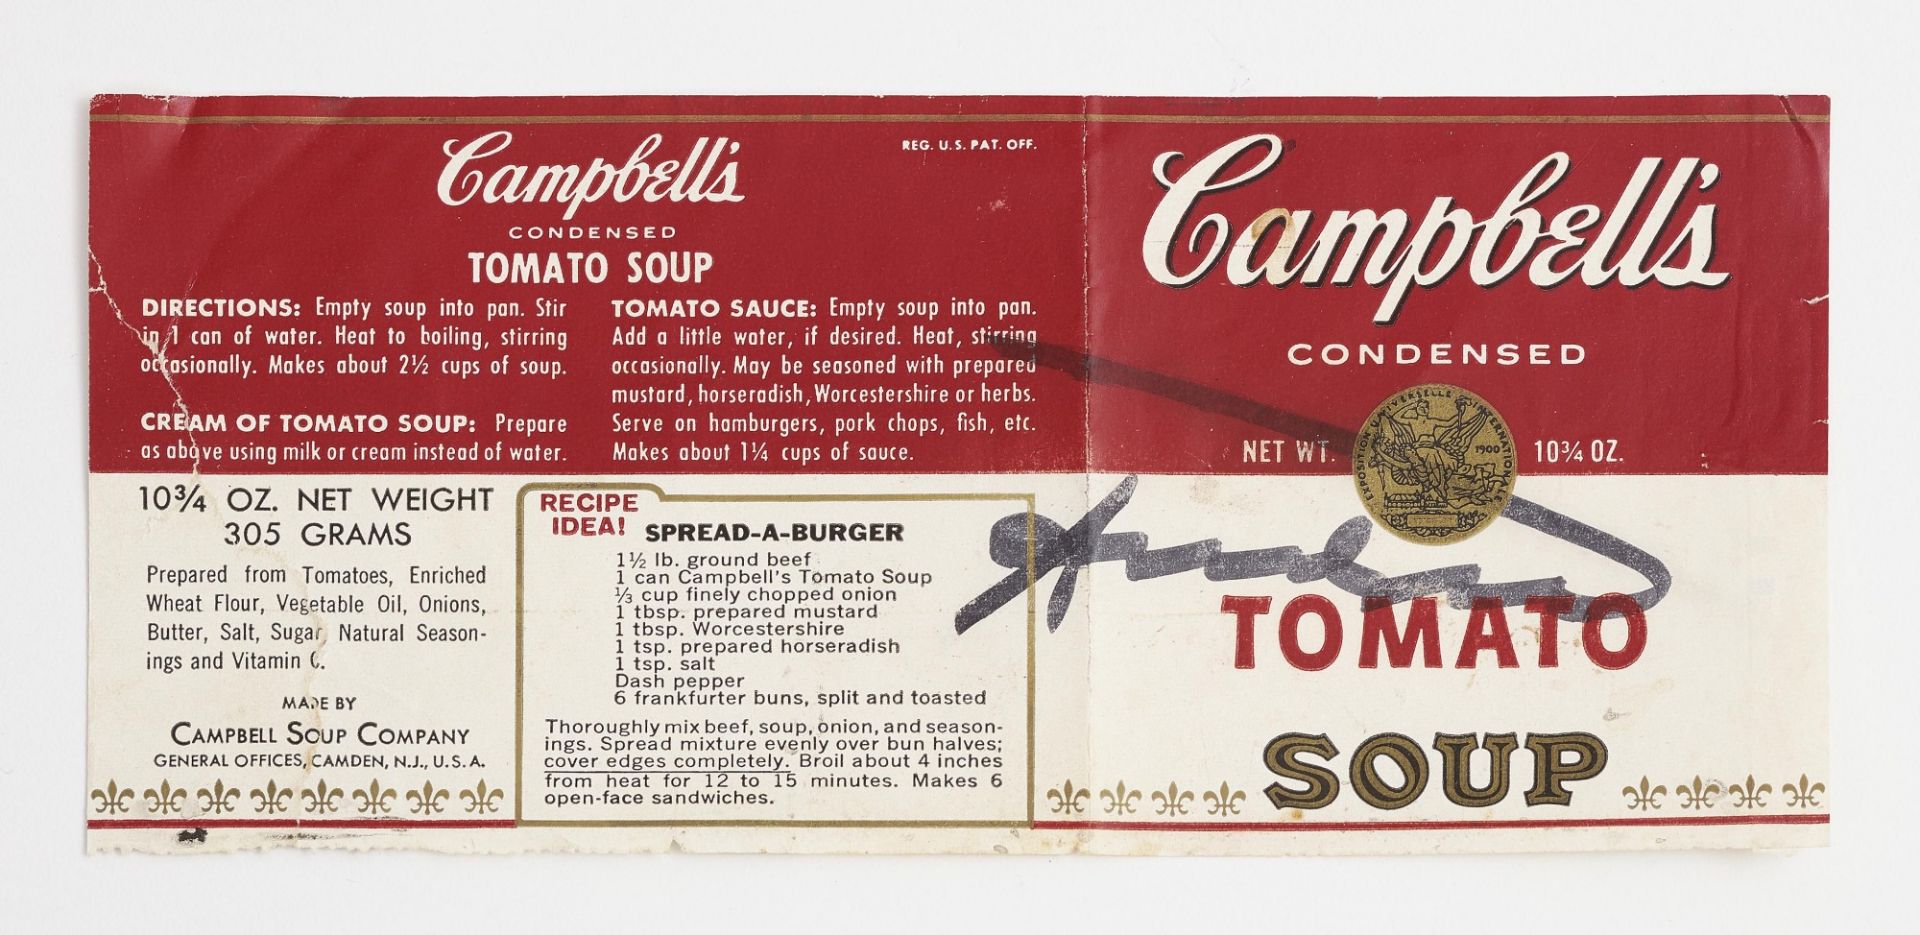 Warhol, Andy 1928 Pittsburgh - 1987 New York Campbell's condensed Tomato Soup. 1966/1969